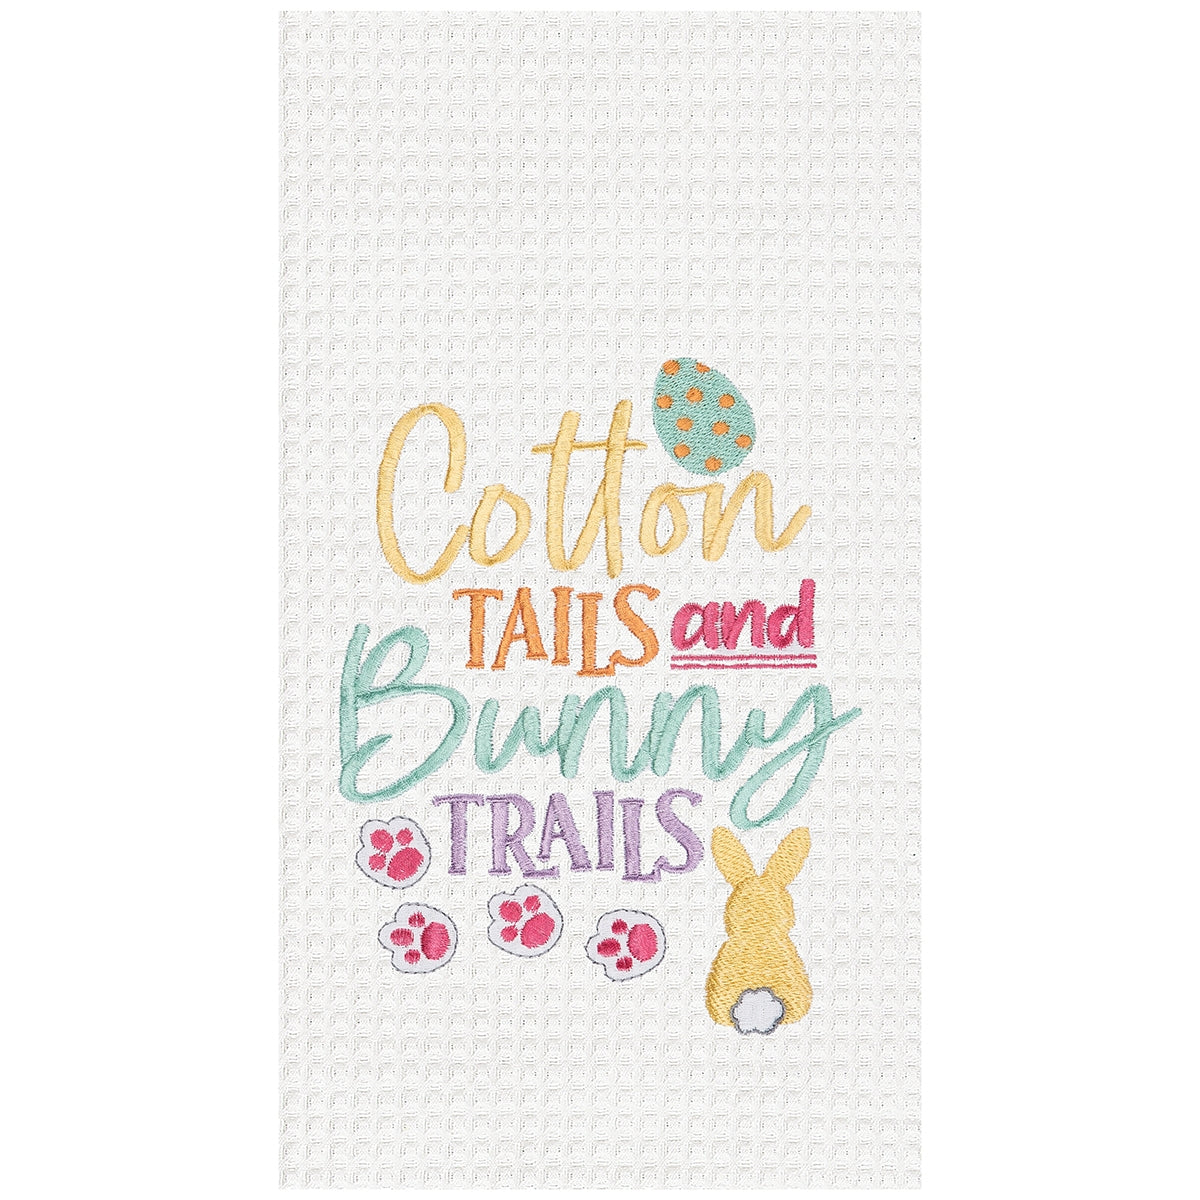 Cotton Tails and Bunny Trails Embroidered Waffle Weave Kitchen Towel    